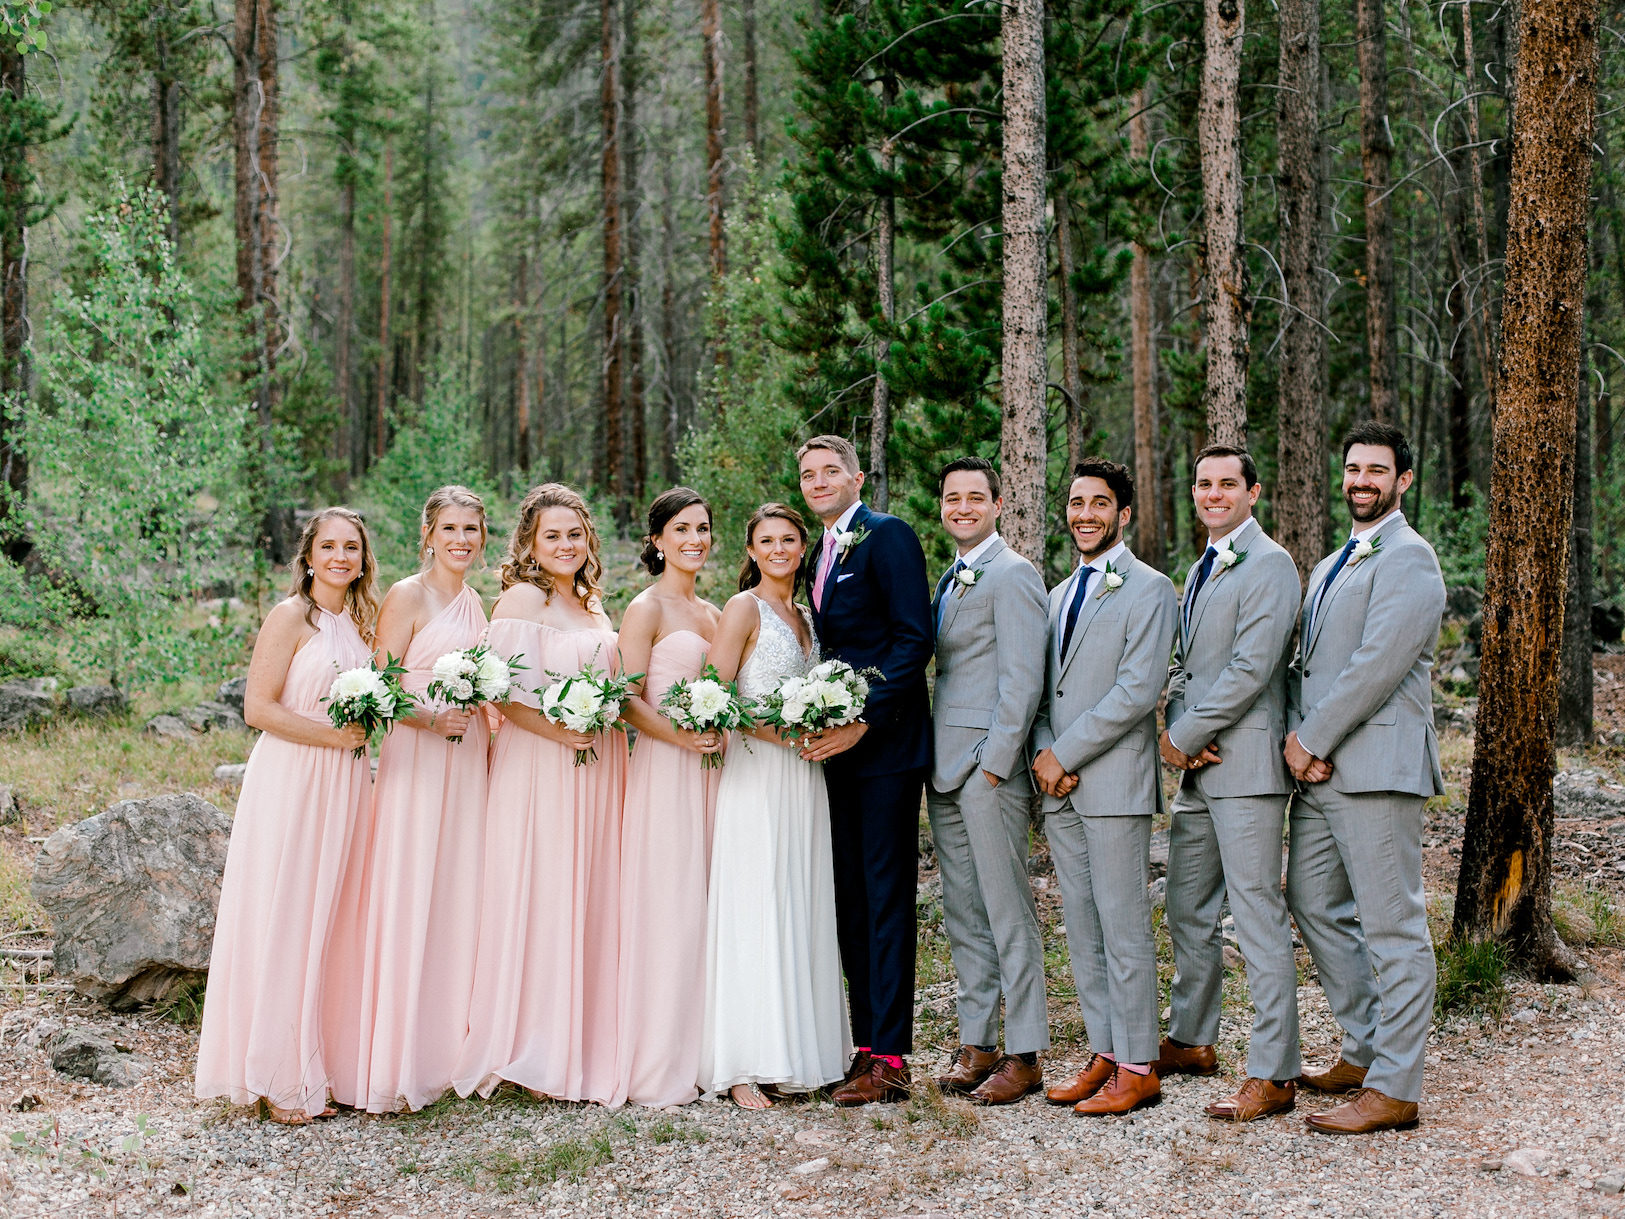 A Romantic Summer wedding at Camp Hale in Colorado with Southwestern touches by The Styled Soiree and Sara Lynn Photographic